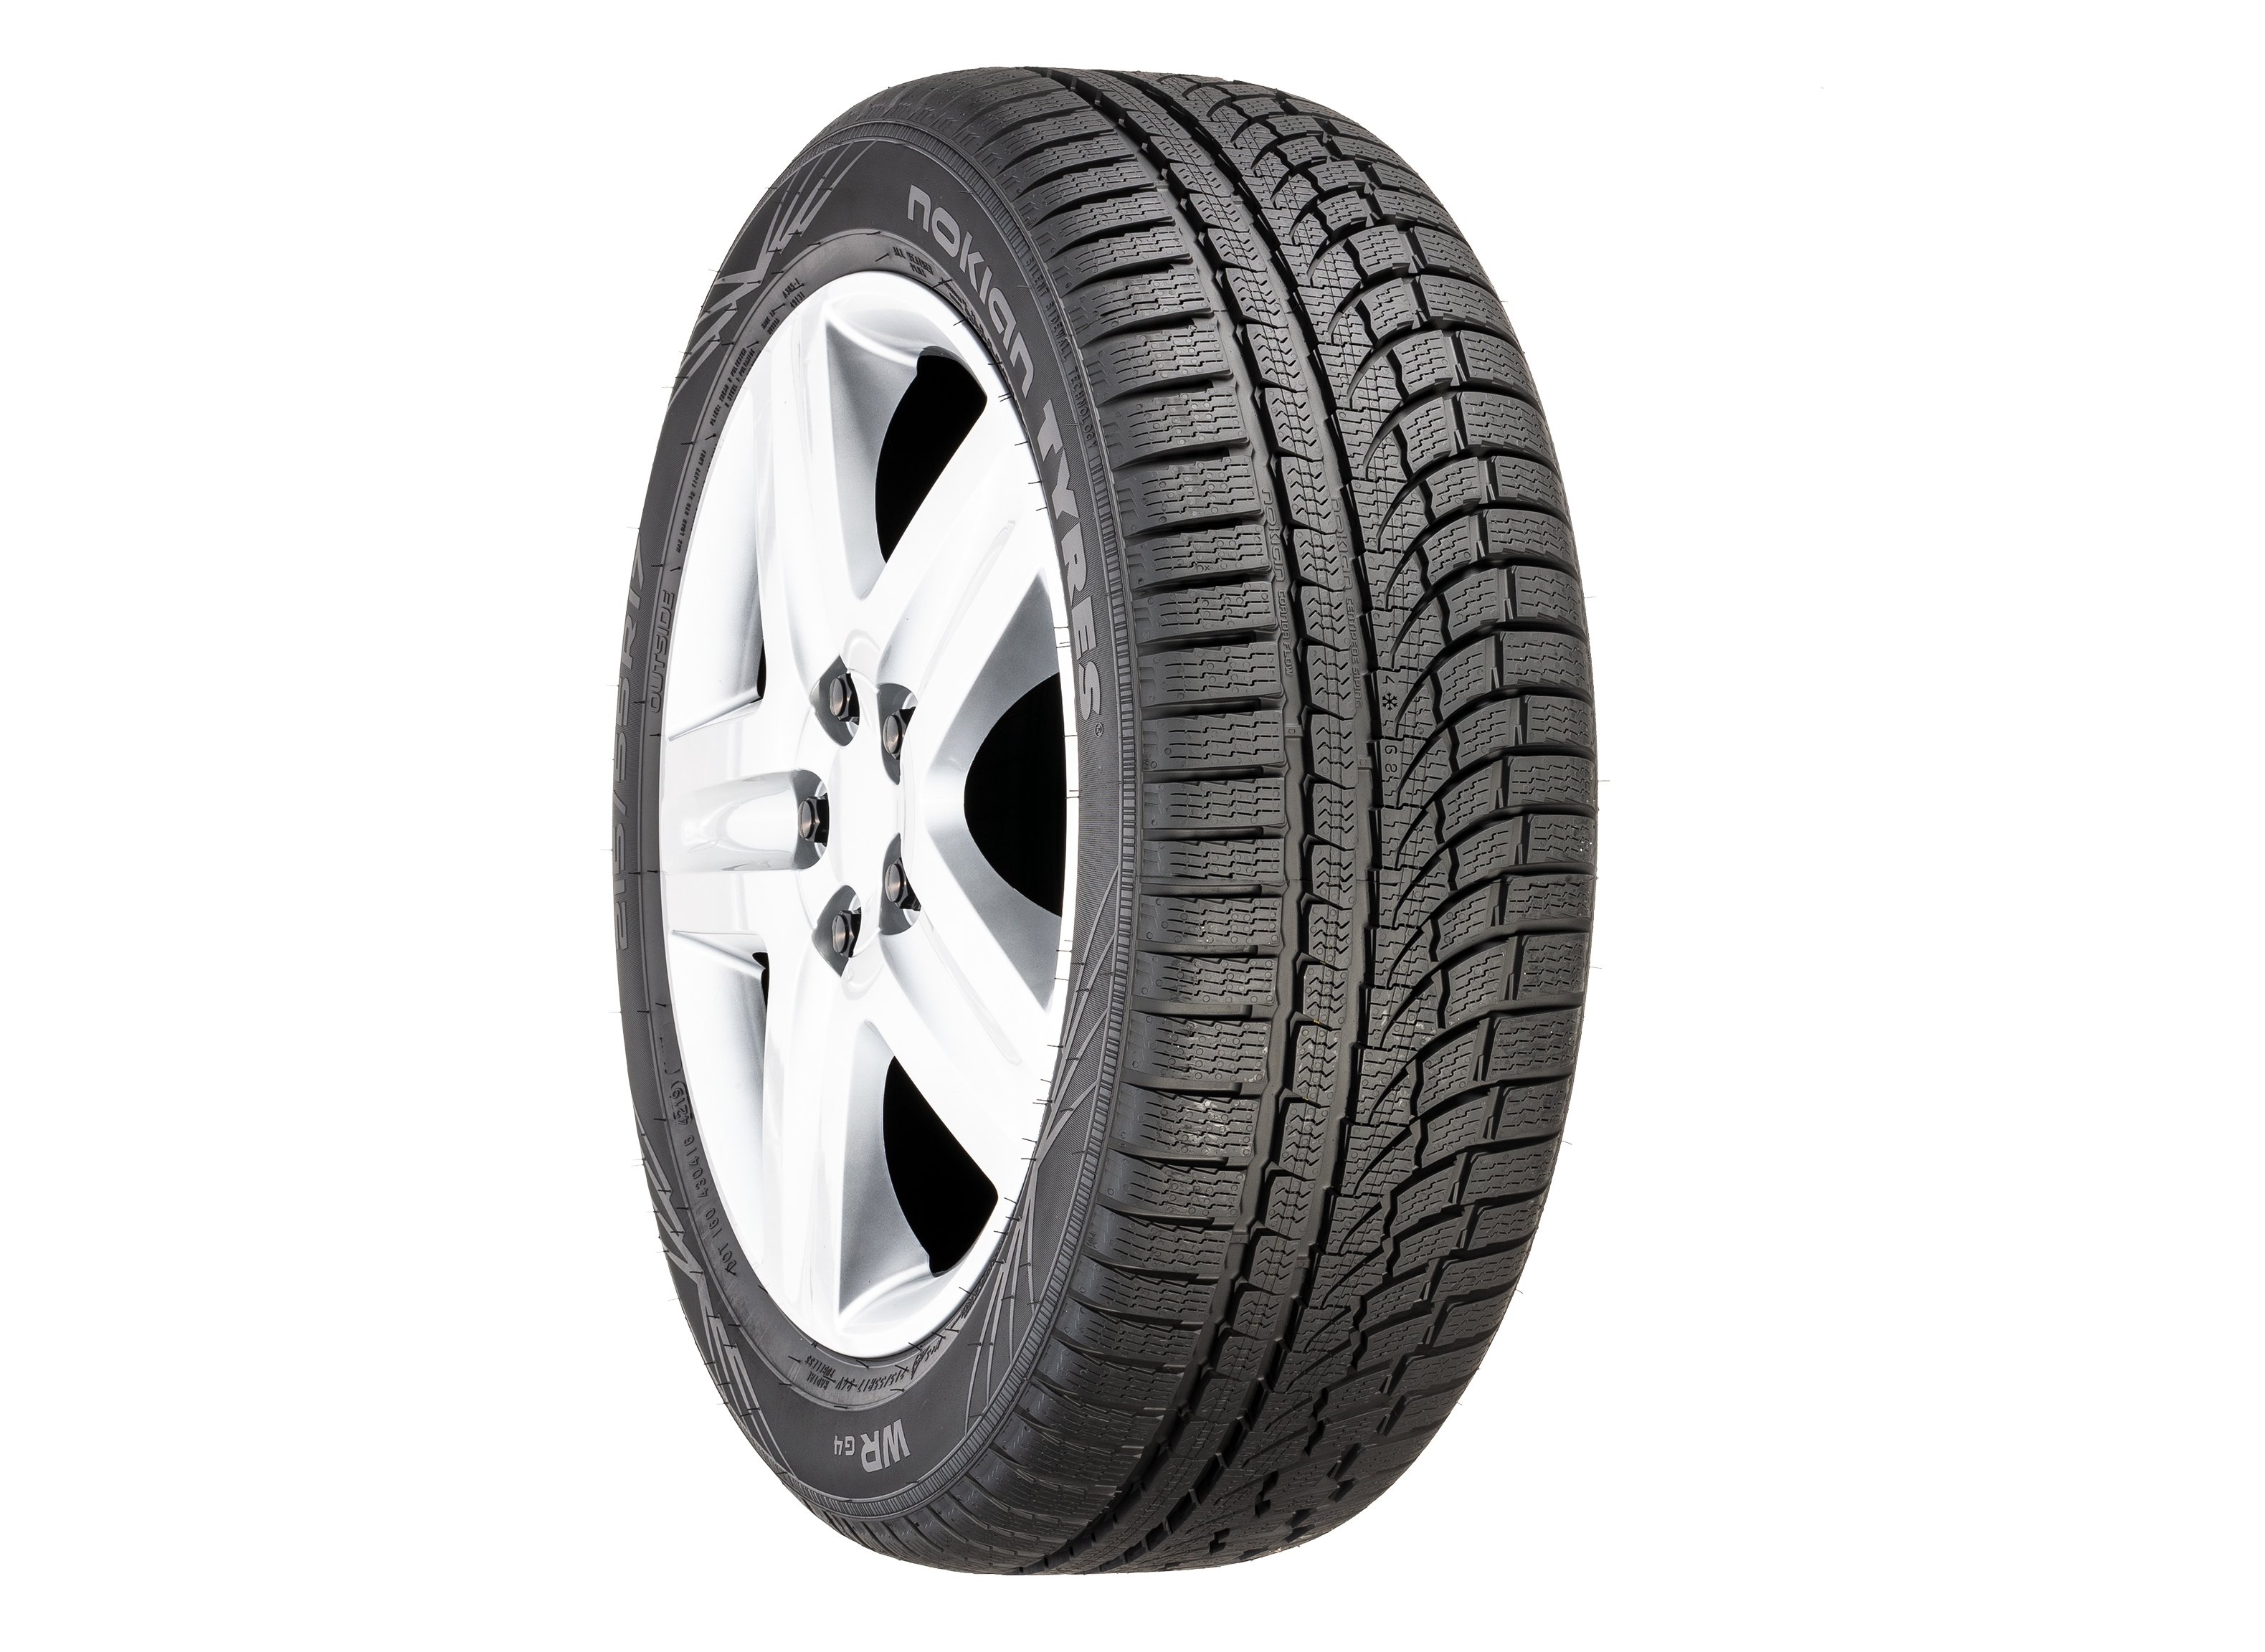 Nokian - Reports Review Tire Consumer WRG4